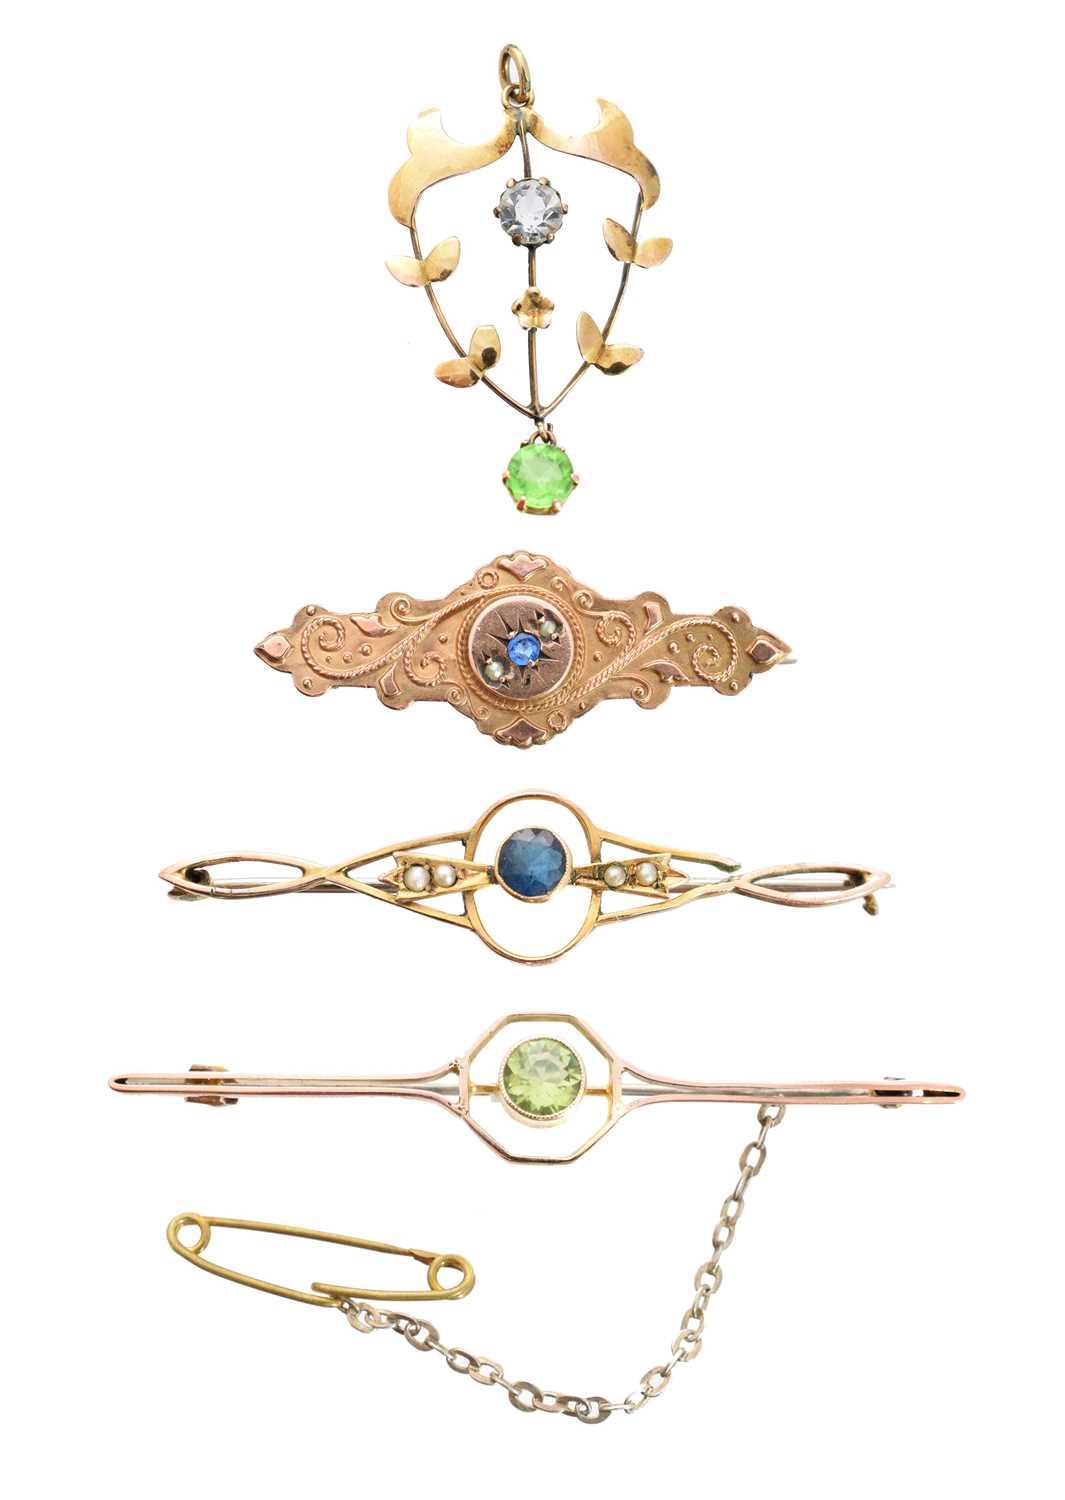 Lot 29 - A selection of early 20th century jewellery